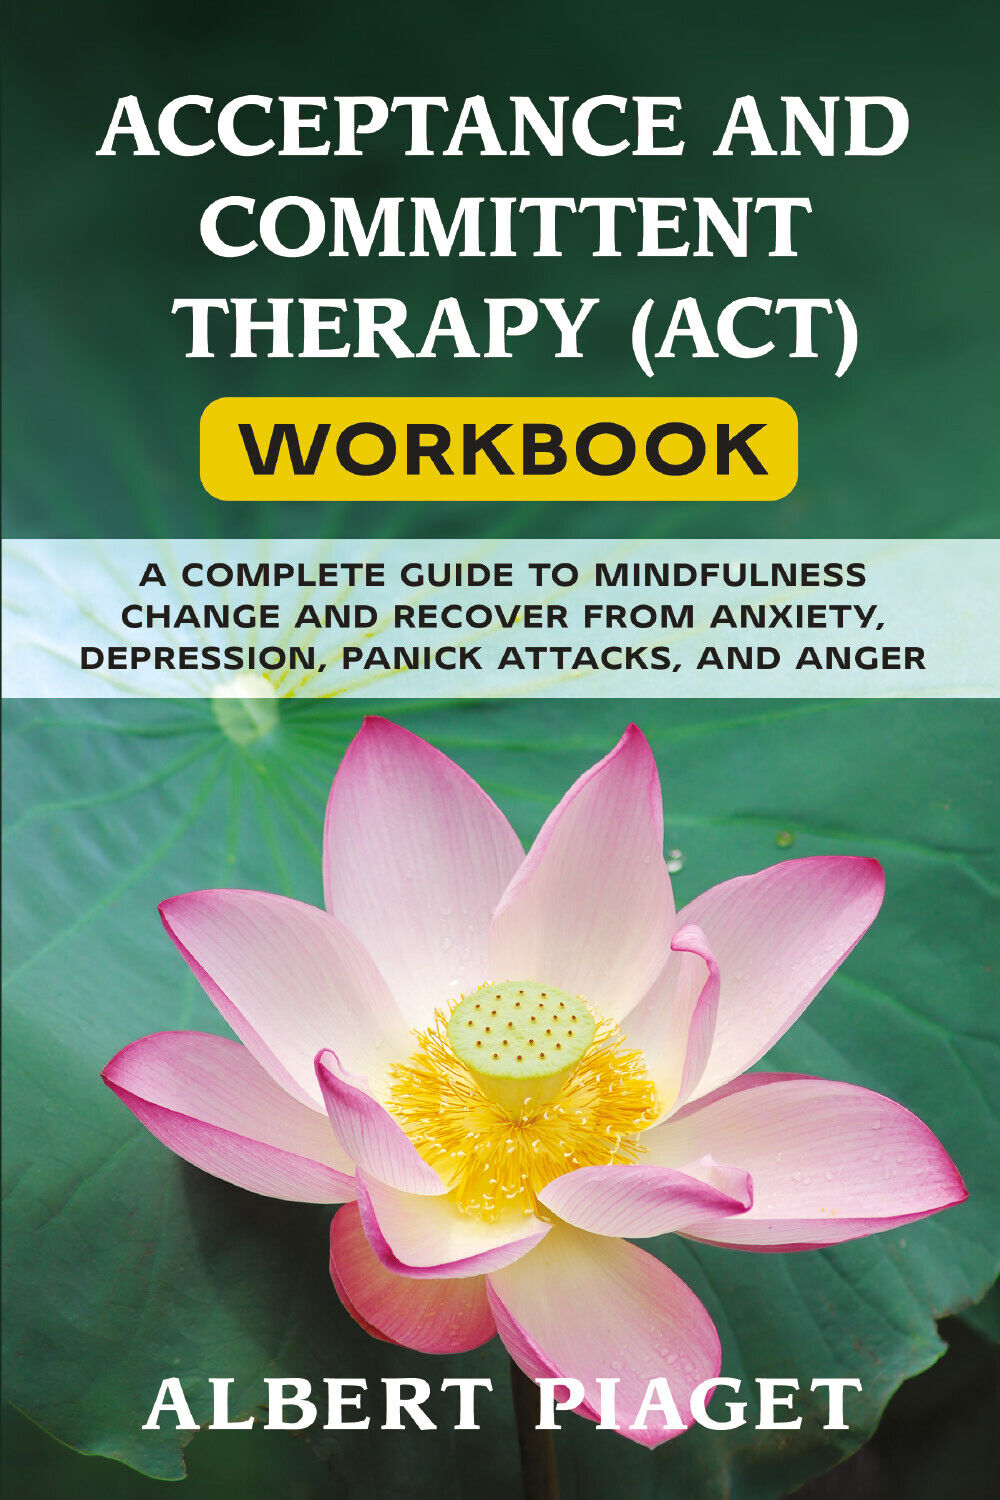 Acceptance and committent therapy (ACT) workbook di Albert Piaget,  2021,  Youca